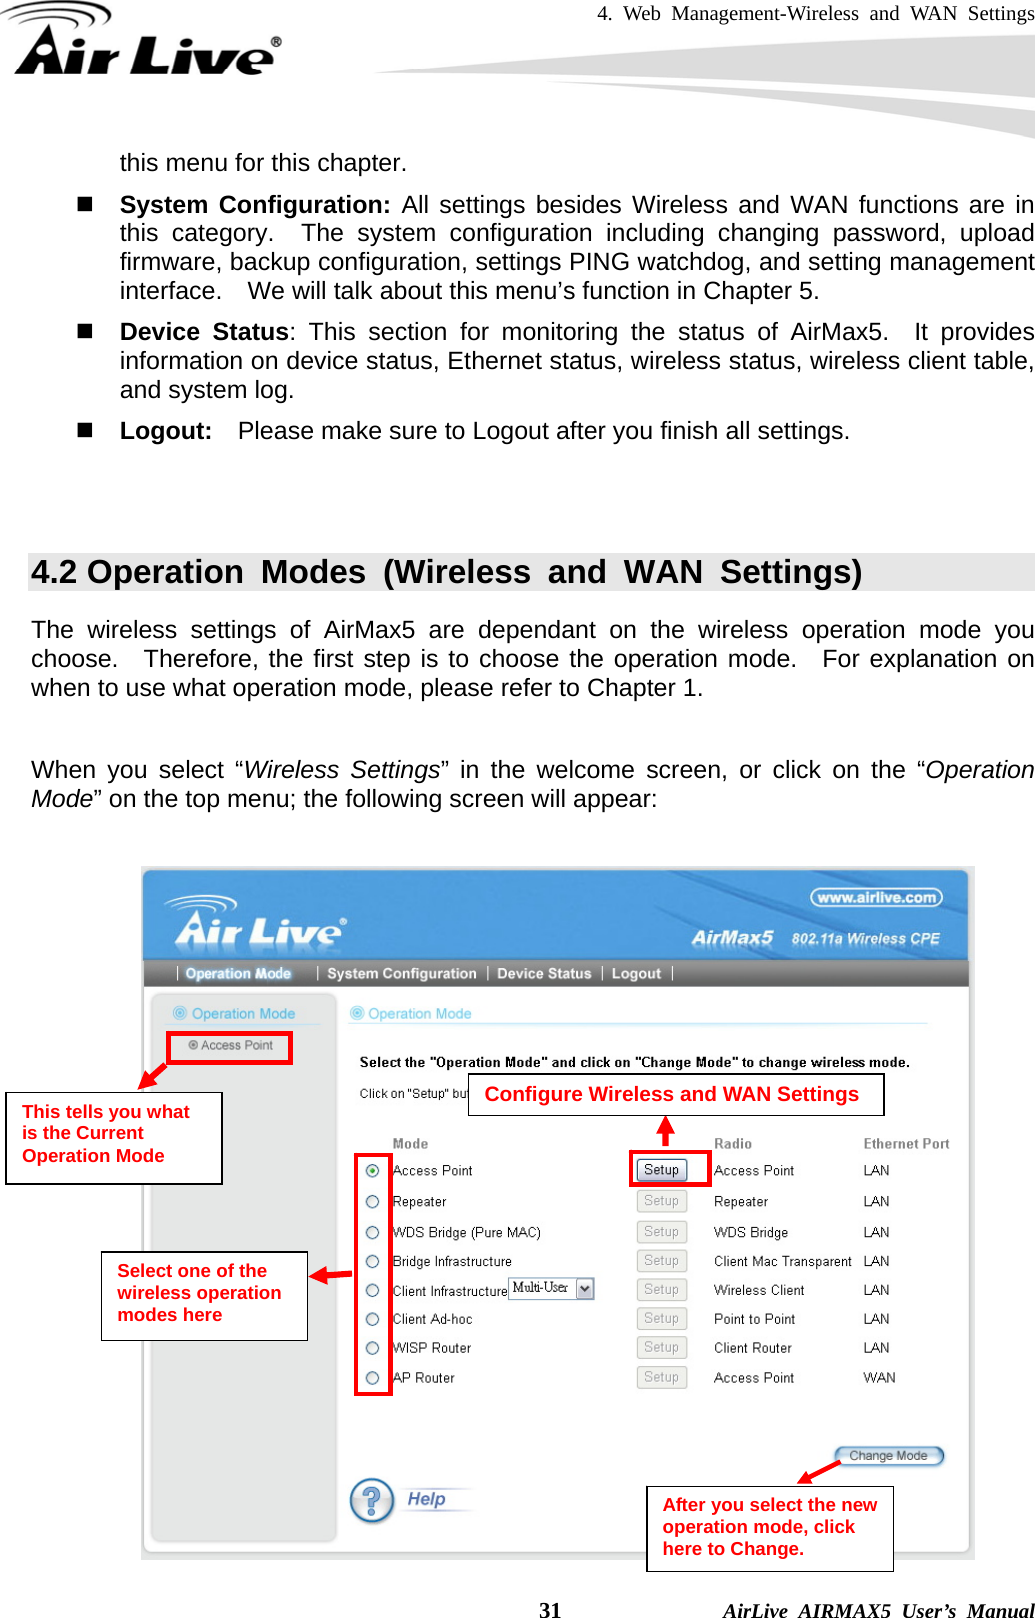 4. Web Management-Wireless and WAN Settings    31              AirLive AIRMAX5 User’s Manual this menu for this chapter.  System Configuration: All settings besides Wireless and WAN functions are in this category.  The system configuration including changing password, upload firmware, backup configuration, settings PING watchdog, and setting management interface.    We will talk about this menu’s function in Chapter 5.  Device Status: This section for monitoring the status of AirMax5.  It provides information on device status, Ethernet status, wireless status, wireless client table, and system log.    Logout:    Please make sure to Logout after you finish all settings.   4.2 Operation Modes (Wireless and WAN Settings) The wireless settings of AirMax5 are dependant on the wireless operation mode you choose.  Therefore, the first step is to choose the operation mode.  For explanation on when to use what operation mode, please refer to Chapter 1.      When you select “Wireless Settings” in the welcome screen, or click on the “Operation Mode” on the top menu; the following screen will appear:    This tells you what is the Current Operation Mode Configure Wireless and WAN Settings After you select the new operation mode, click here to Change. Select one of the wireless operation modes here 